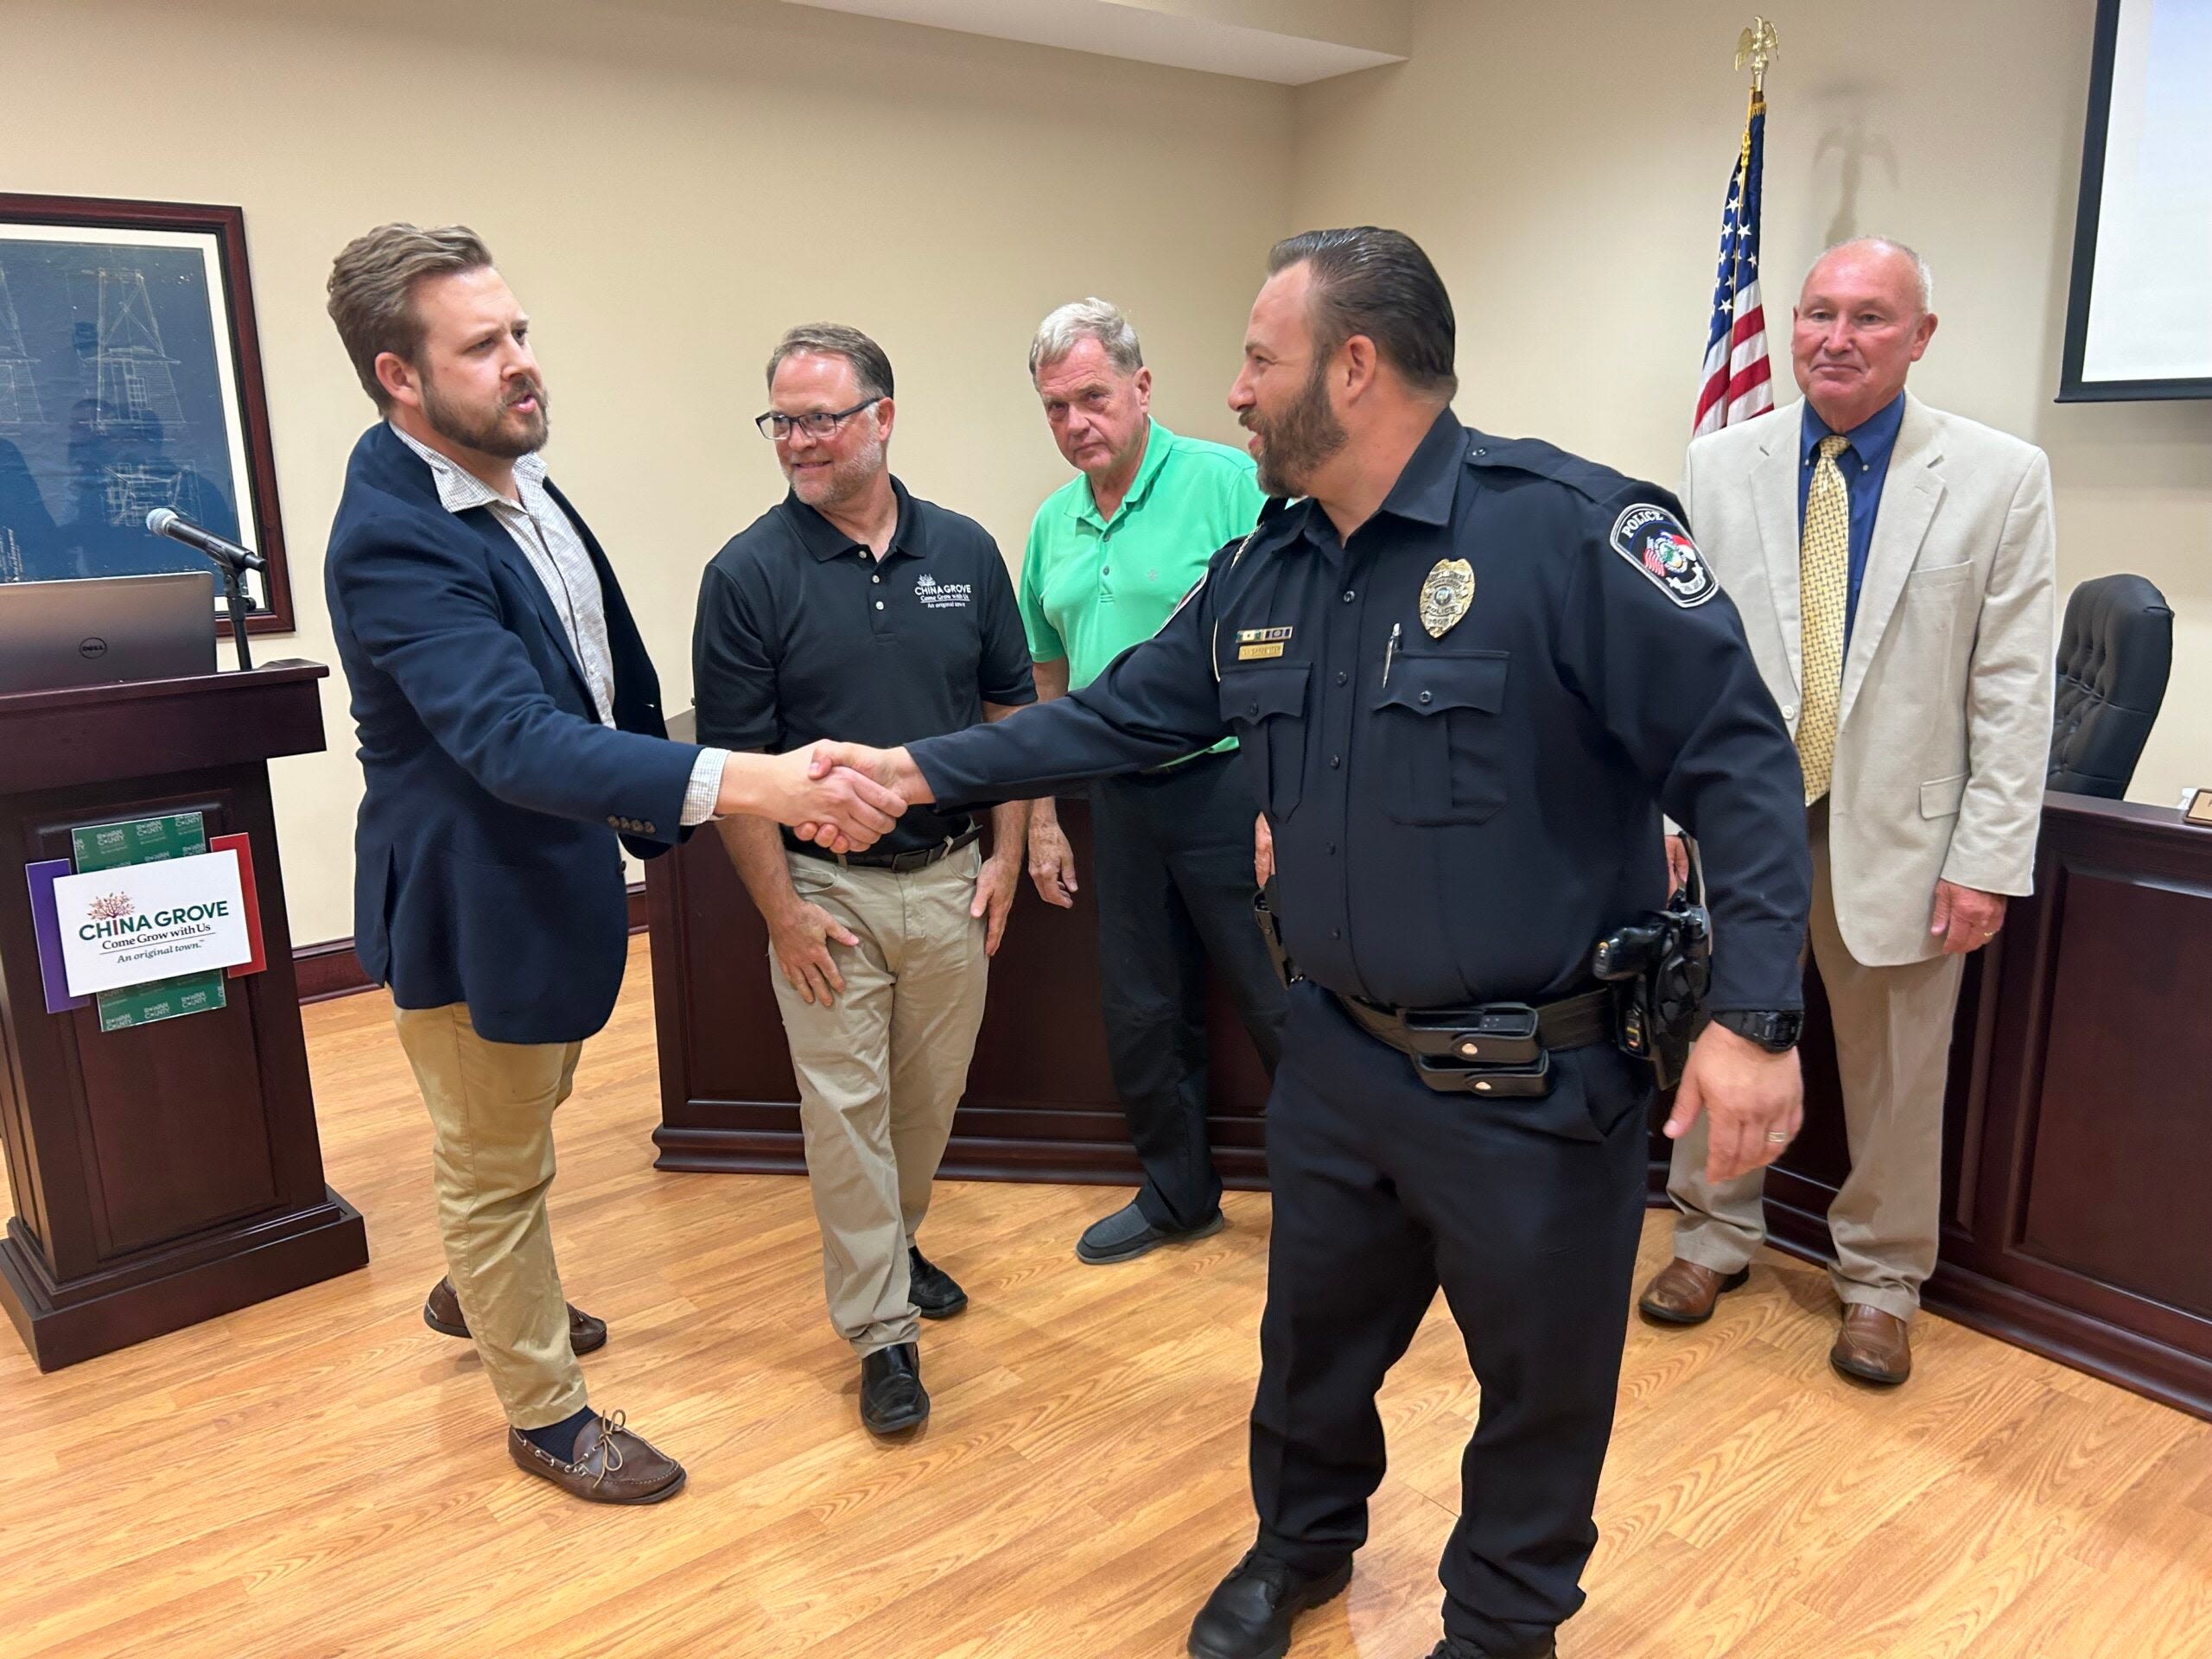 'Dedicated to his job' - China Grove celebrates officer recognized for role at Carson High - Salisbury Post